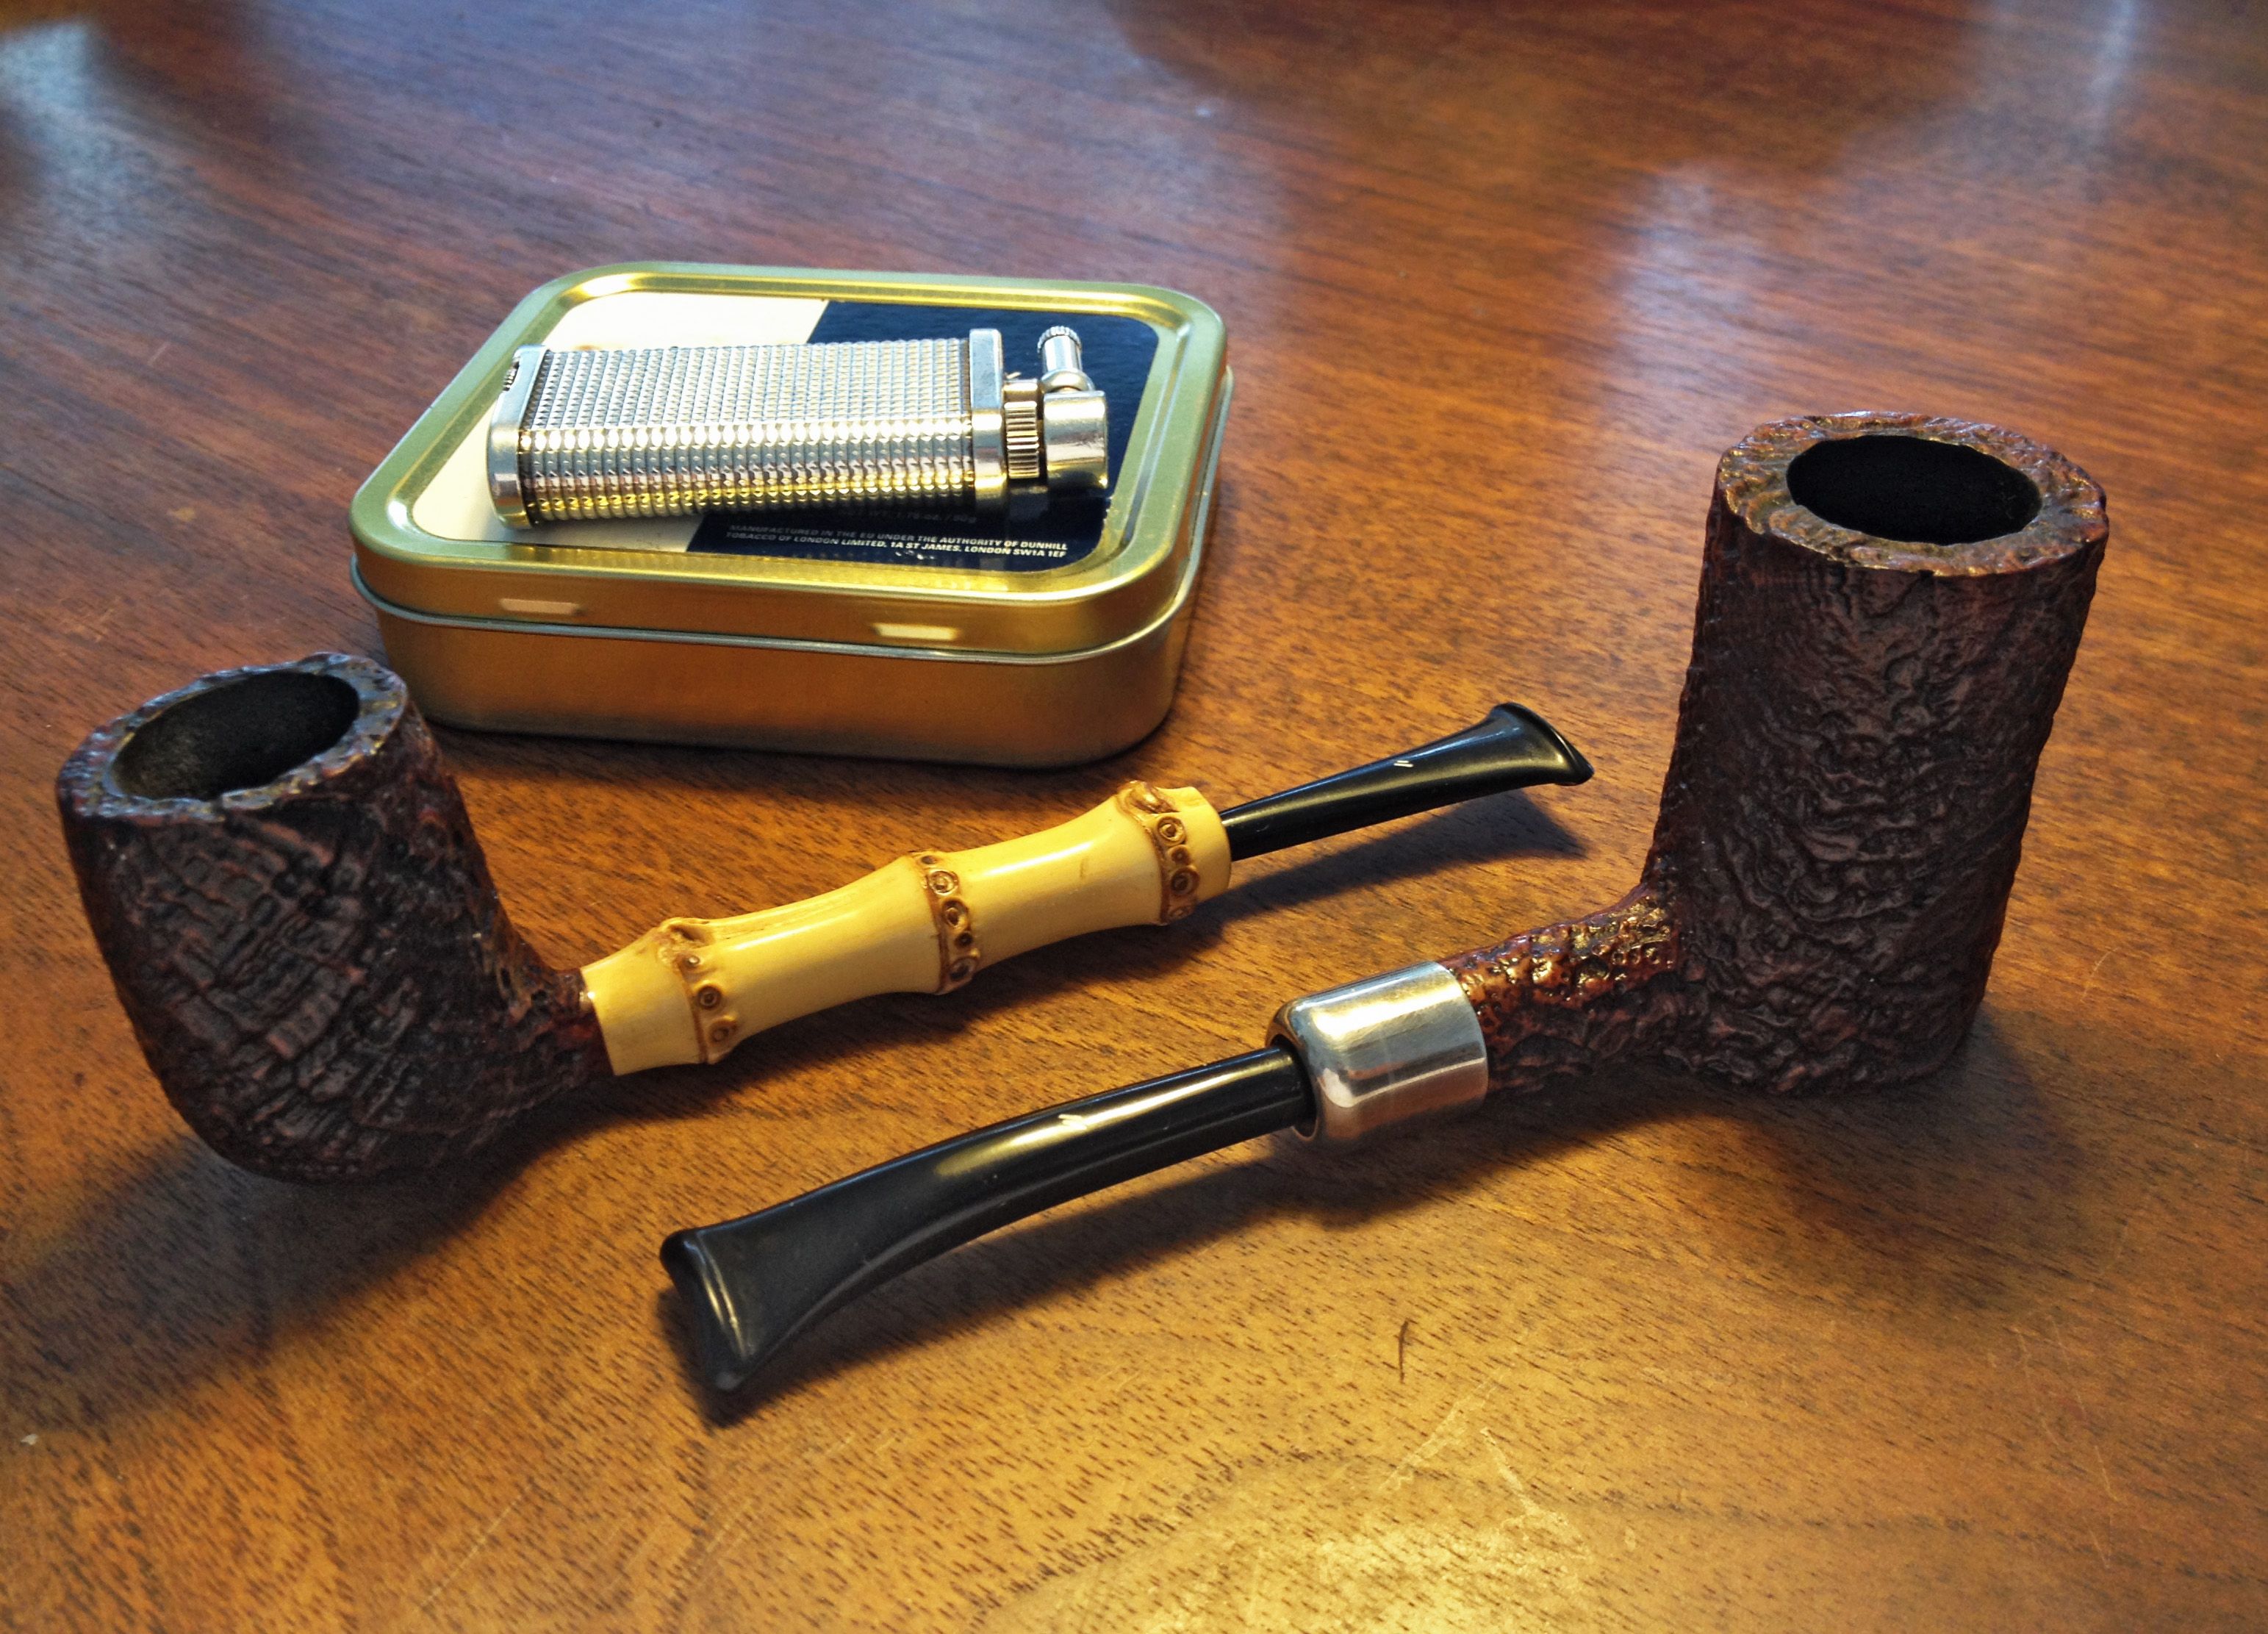 Foundation by Musico - Dunhill | Pipes and smoke | Pinterest | Pipes